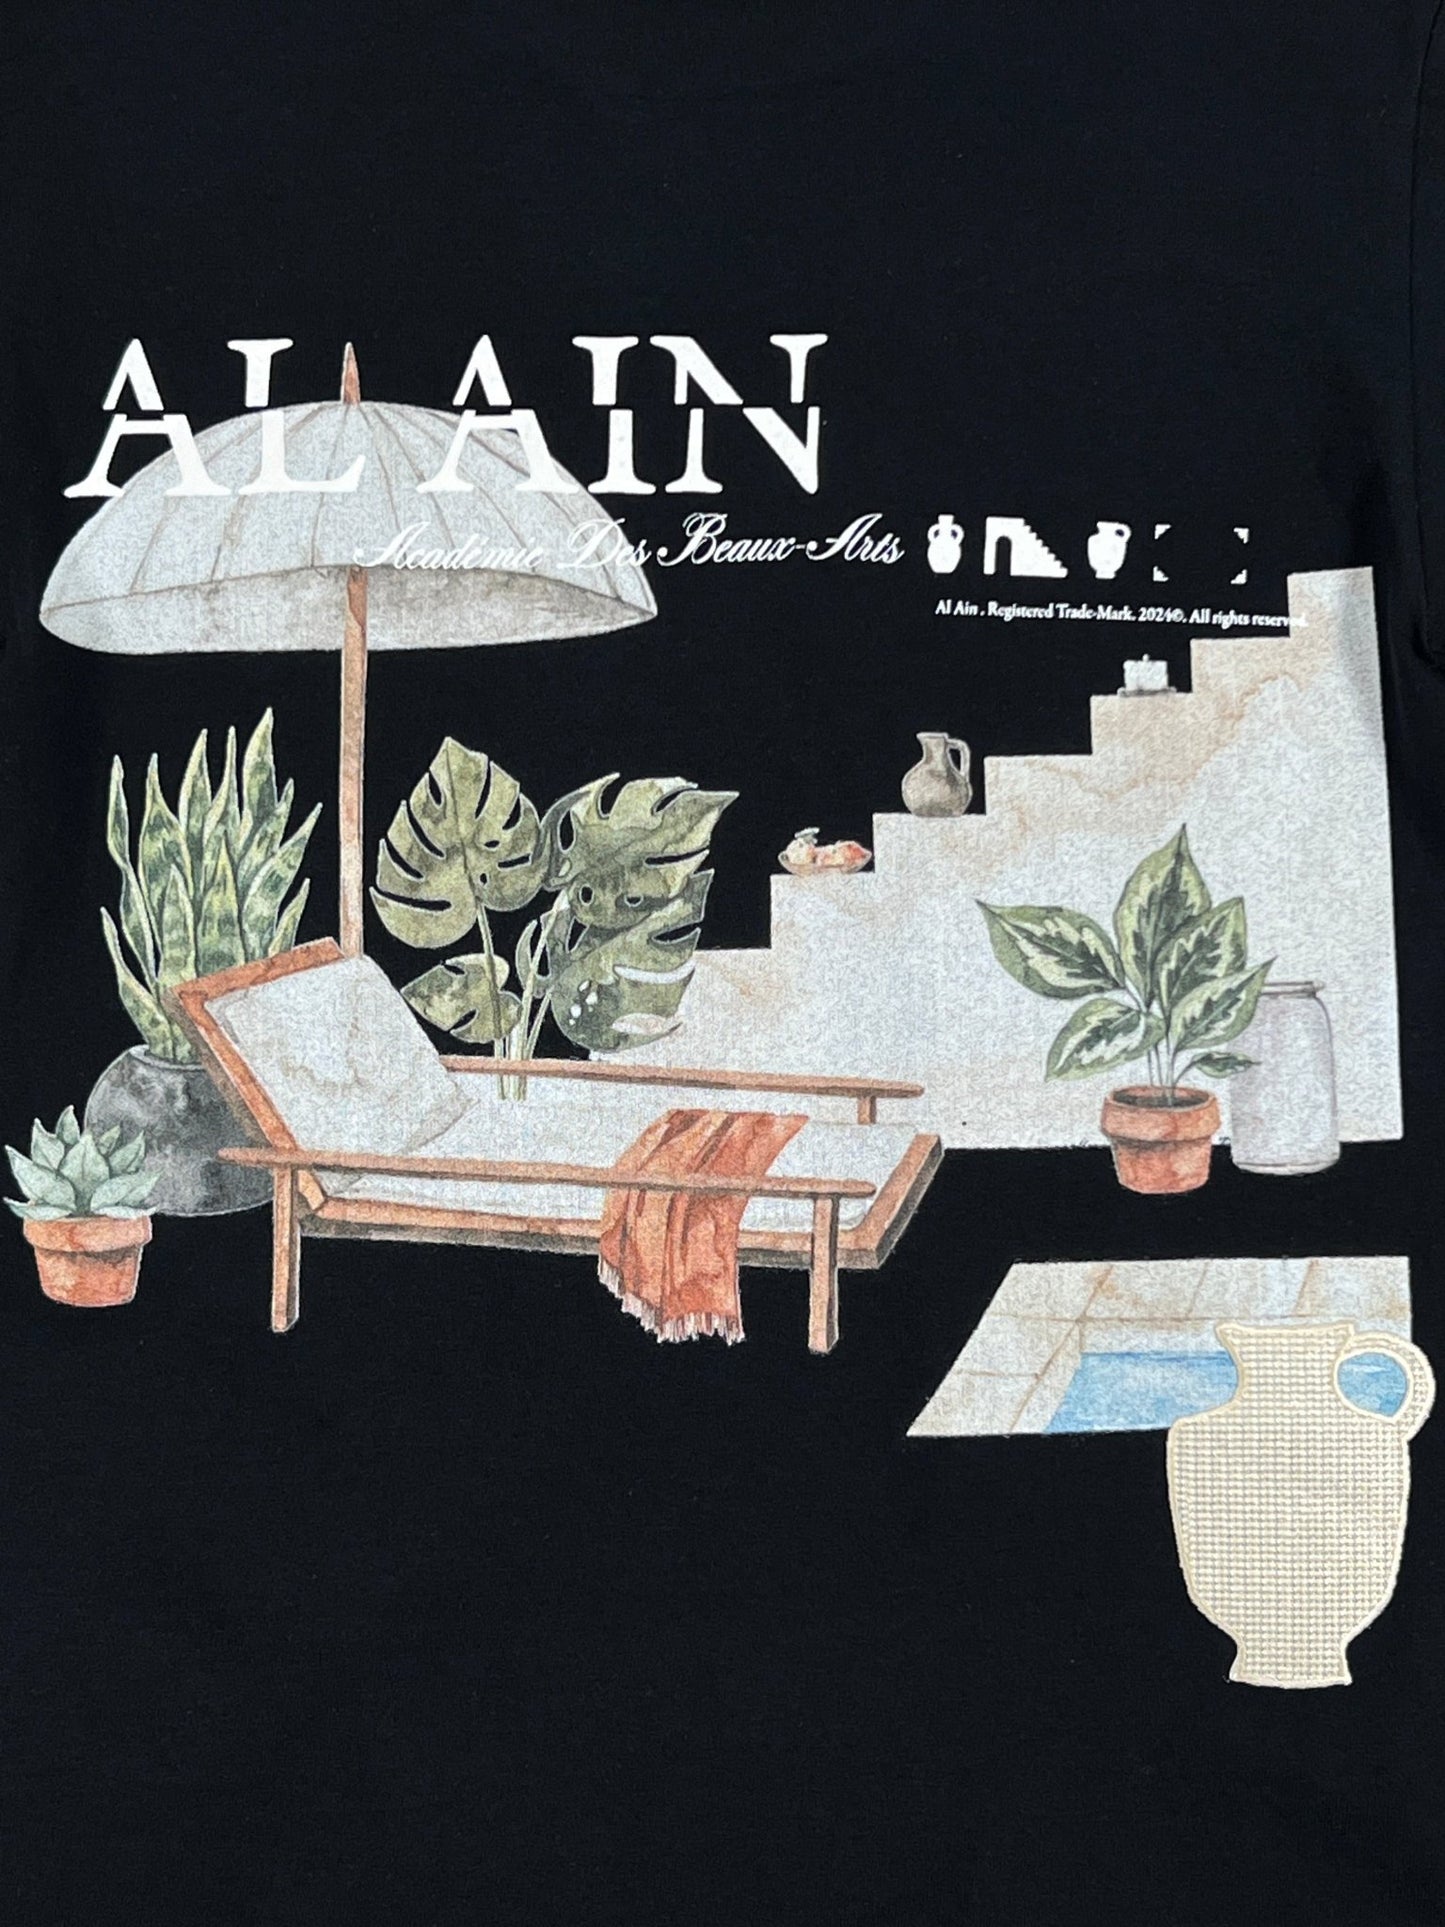 A stylish and eye-catching poolside scene with a lounge chair, umbrella, potted plants, and a stone staircase. Text at the top reads "AL AIN AMHX S124 CHILL NOIR," enhancing the vibe as someone in a graphic t-shirt relaxes nearby.